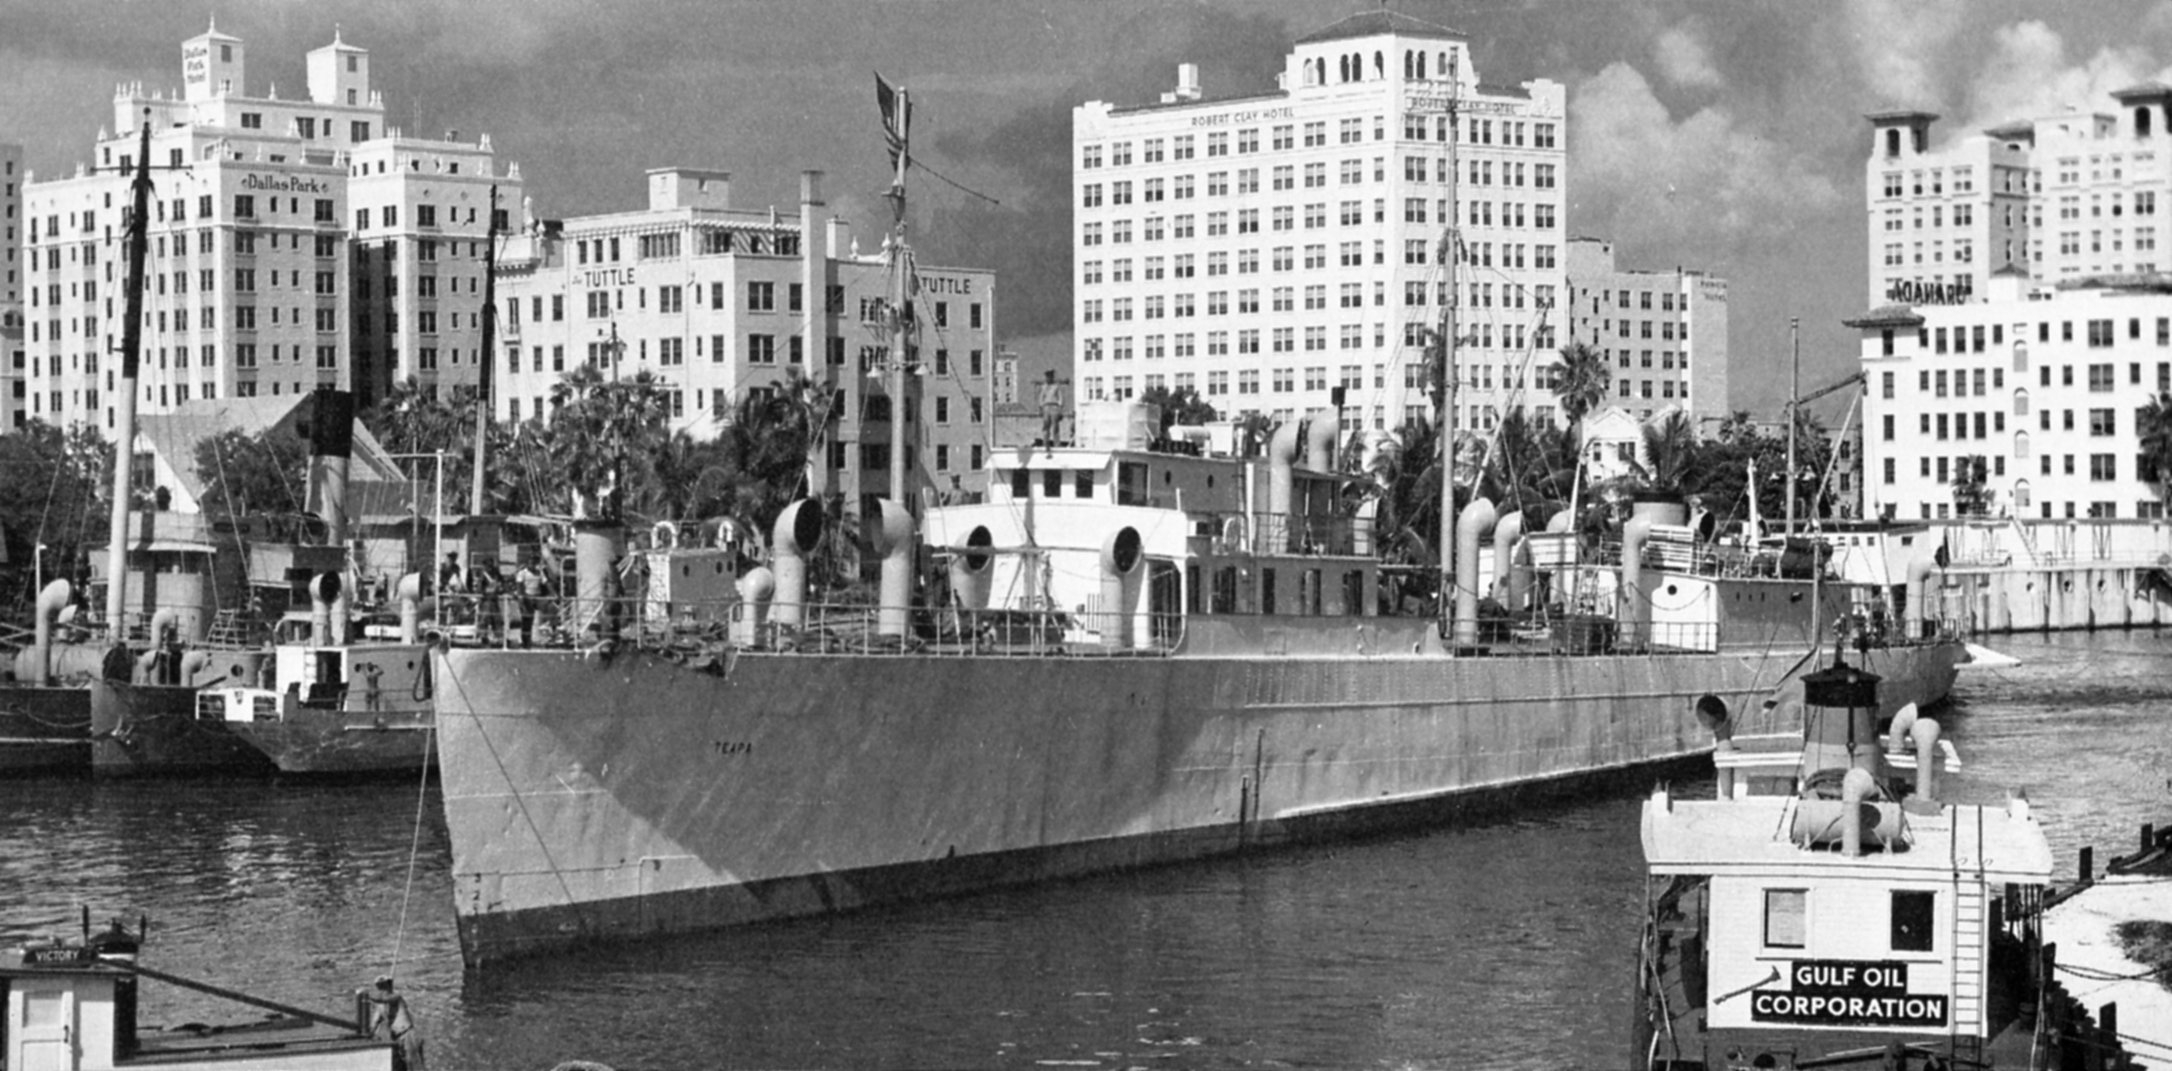 03 MS Teapa after WWII